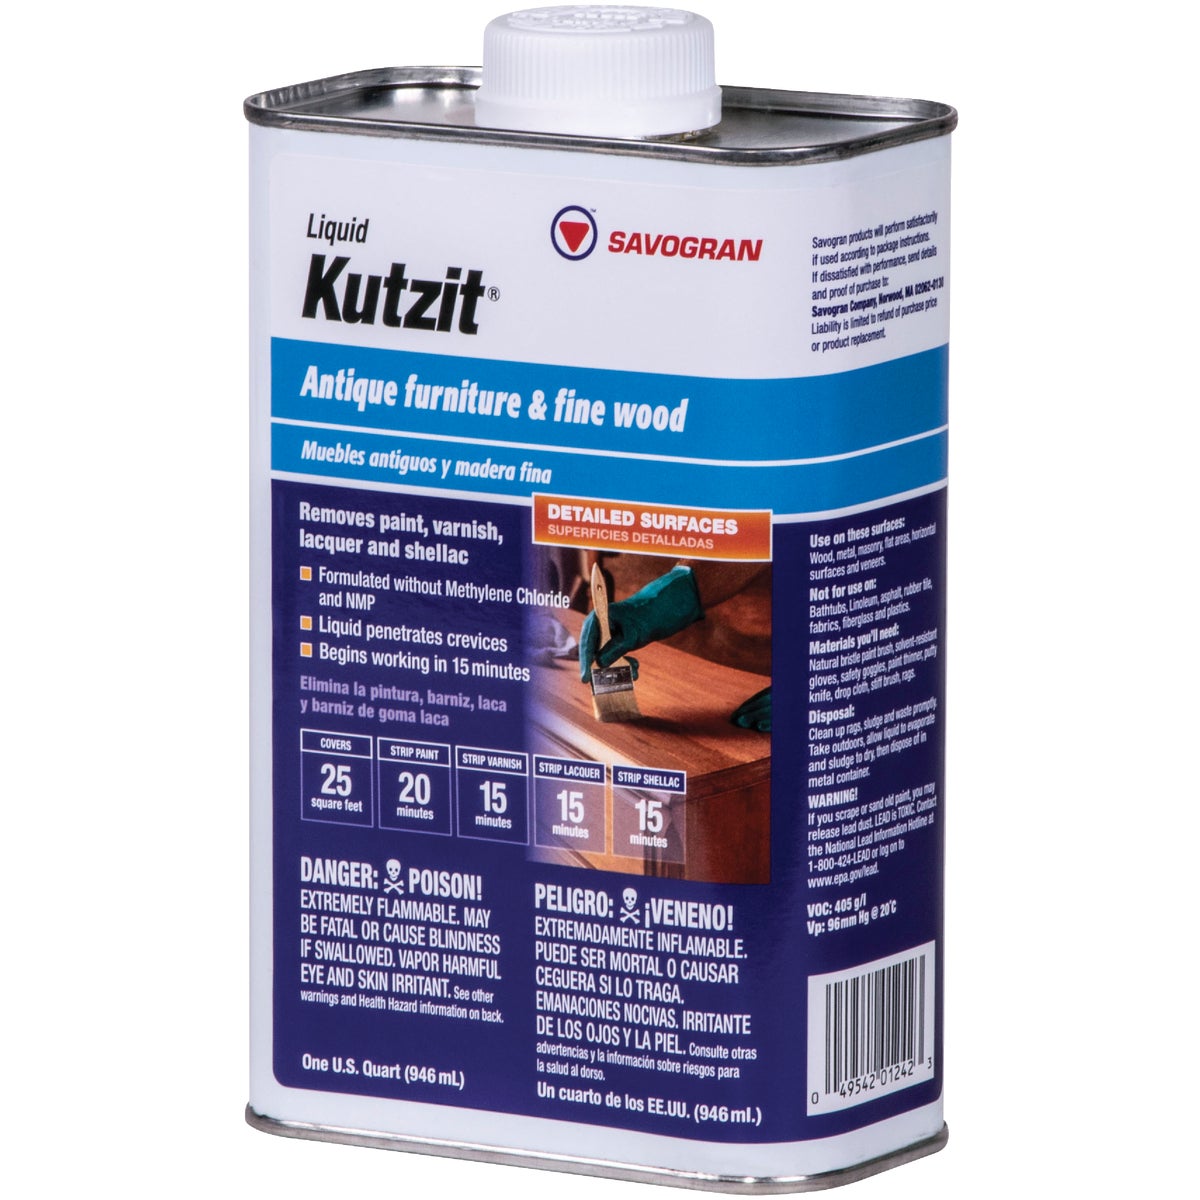 Item 792672, Liquid stripper is suitable for removing paint, varnish, and lacquer from 